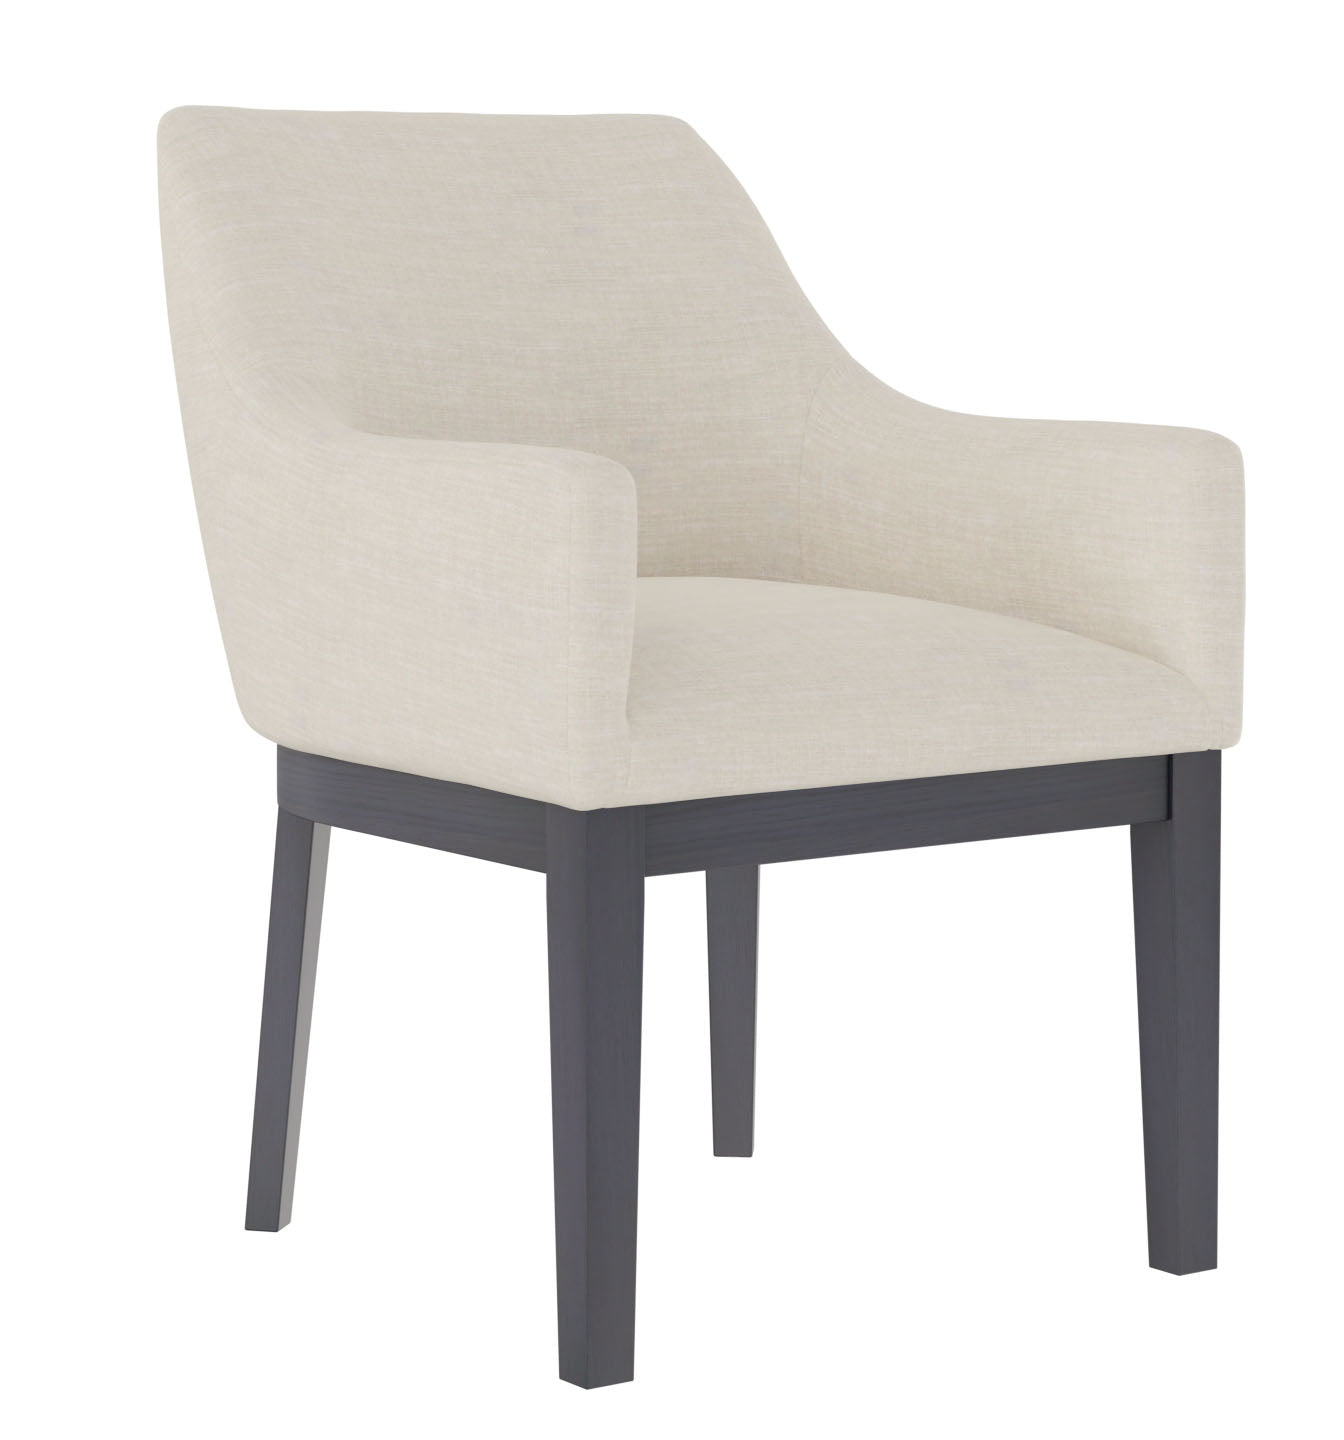 Serenity Upholstered Dining Chair - MJM Furniture